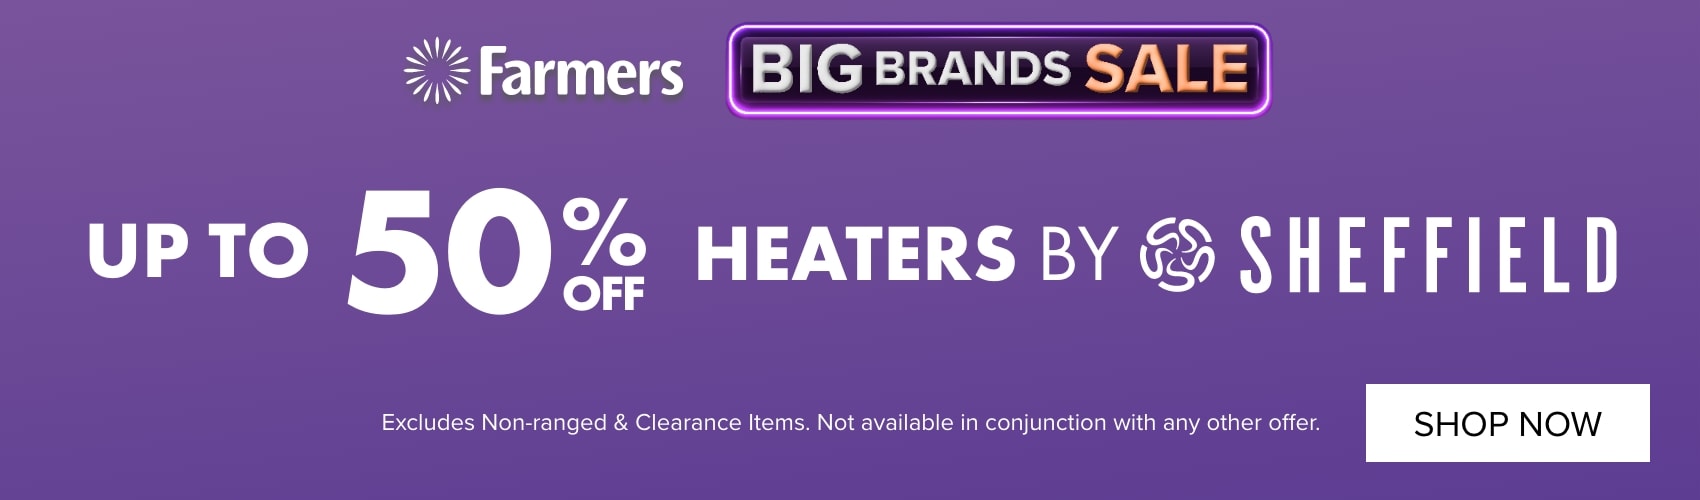 UP TO 50% OFF Heaters by Sheffield